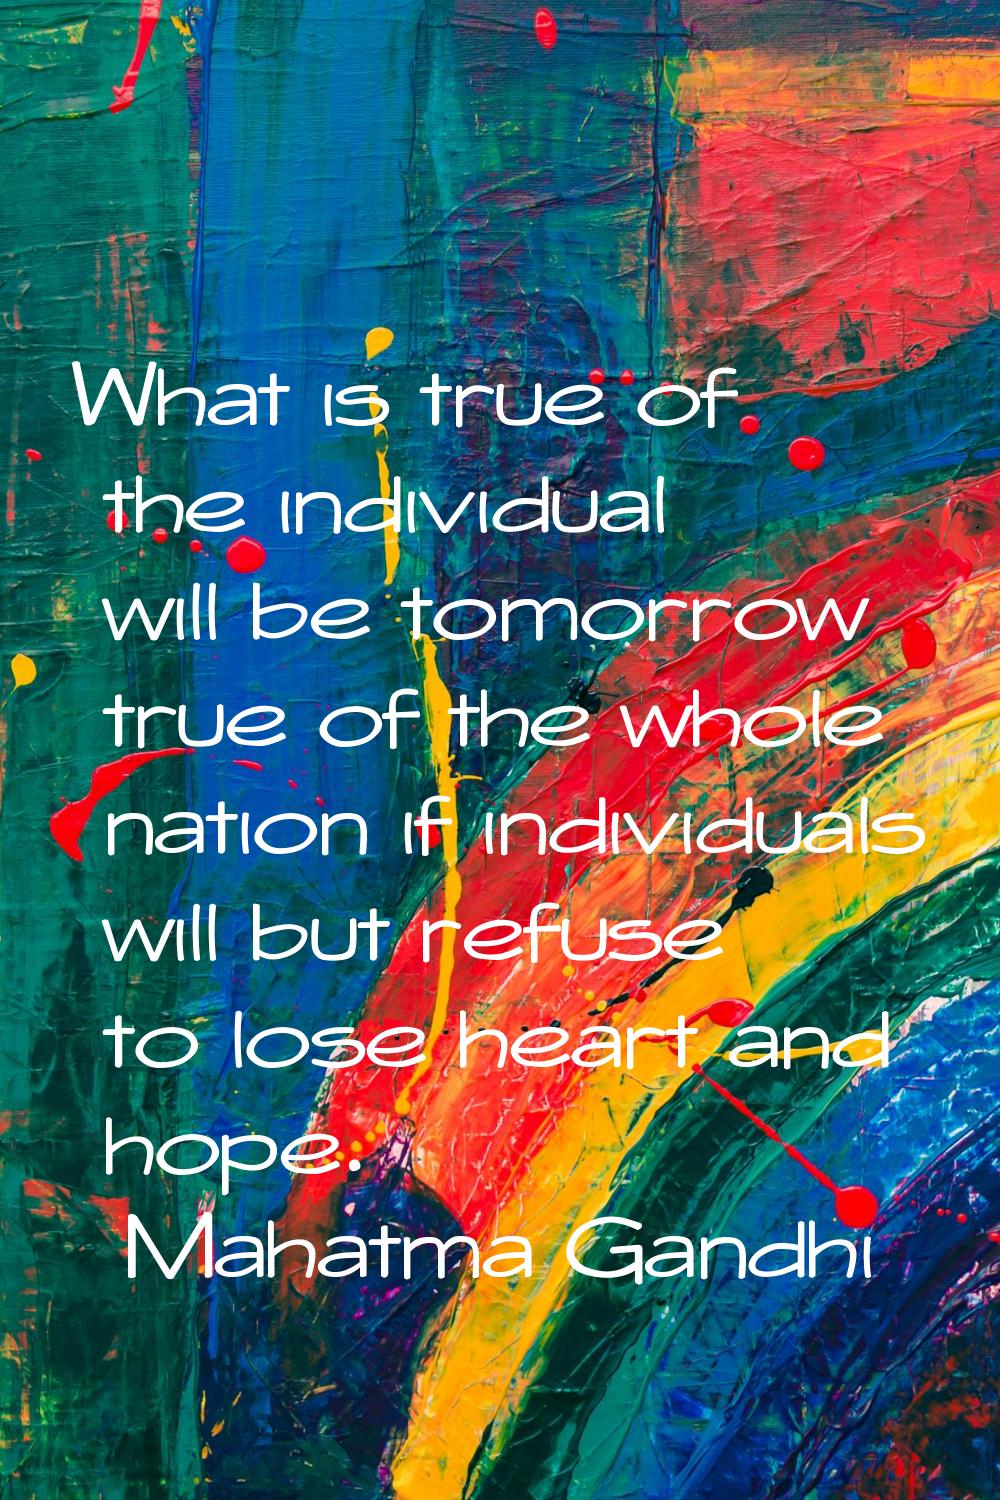 What is true of the individual will be tomorrow true of the whole nation if individuals will but re